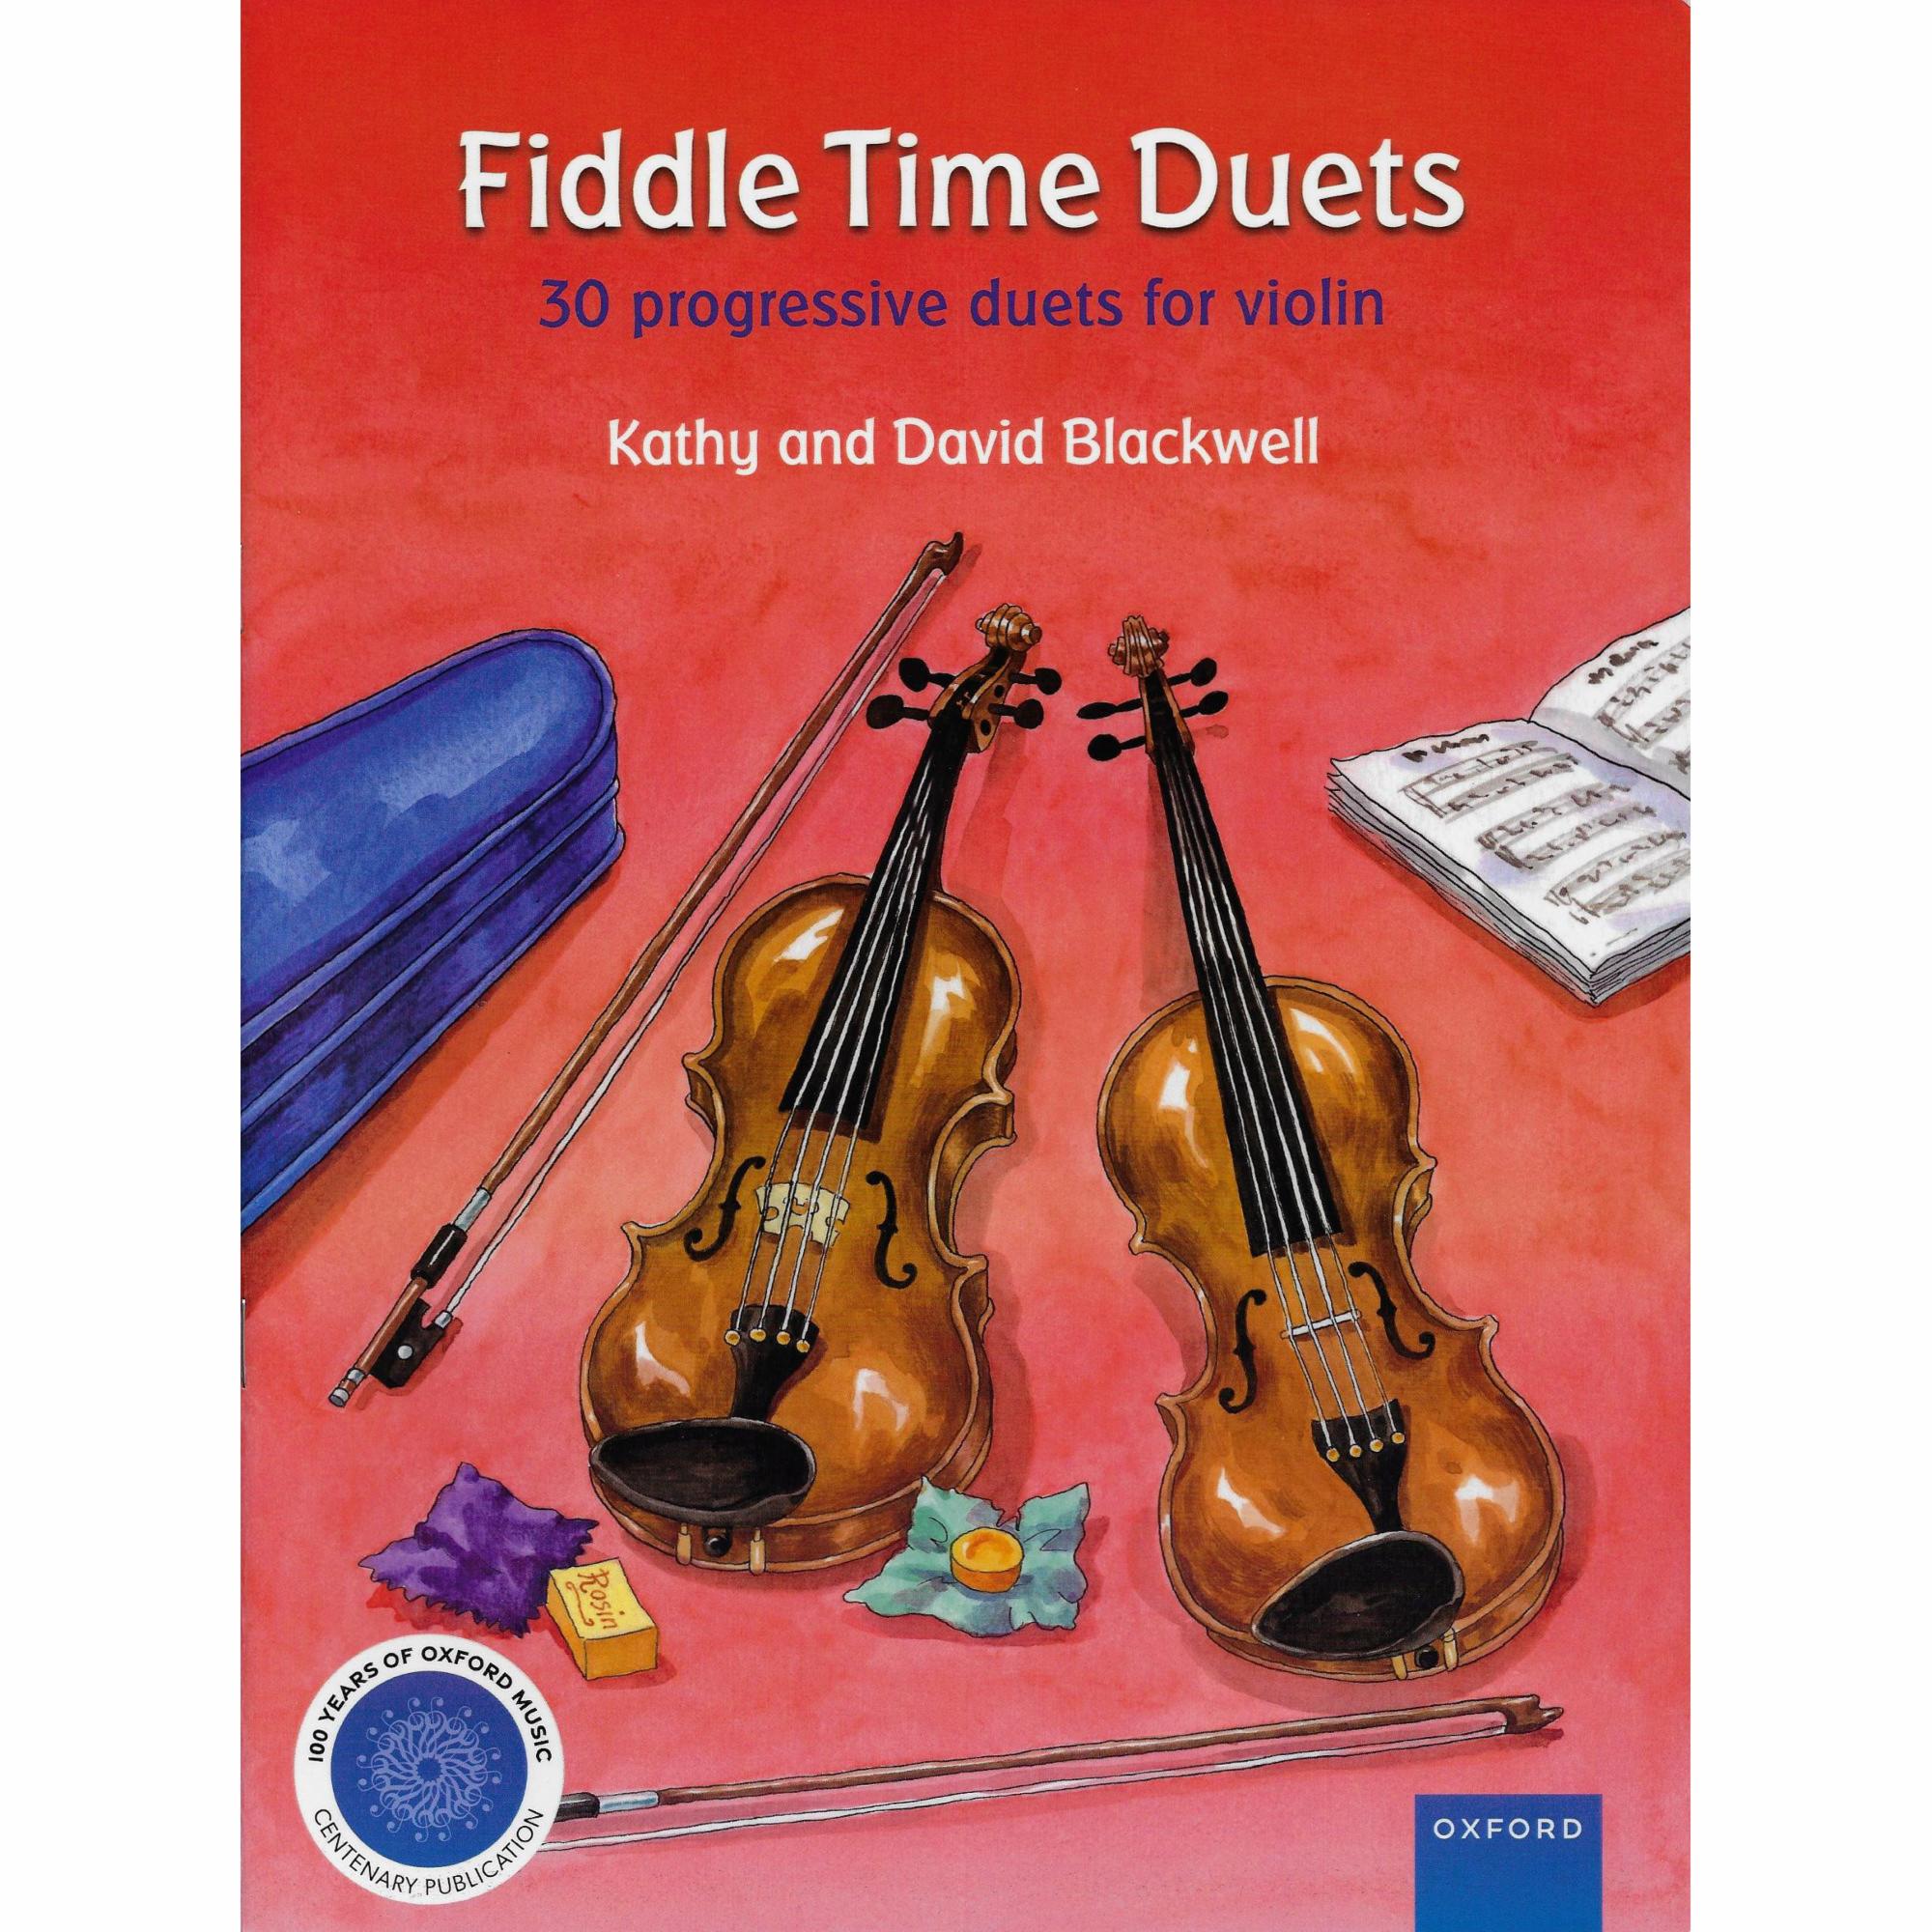 Fiddle Time Duets